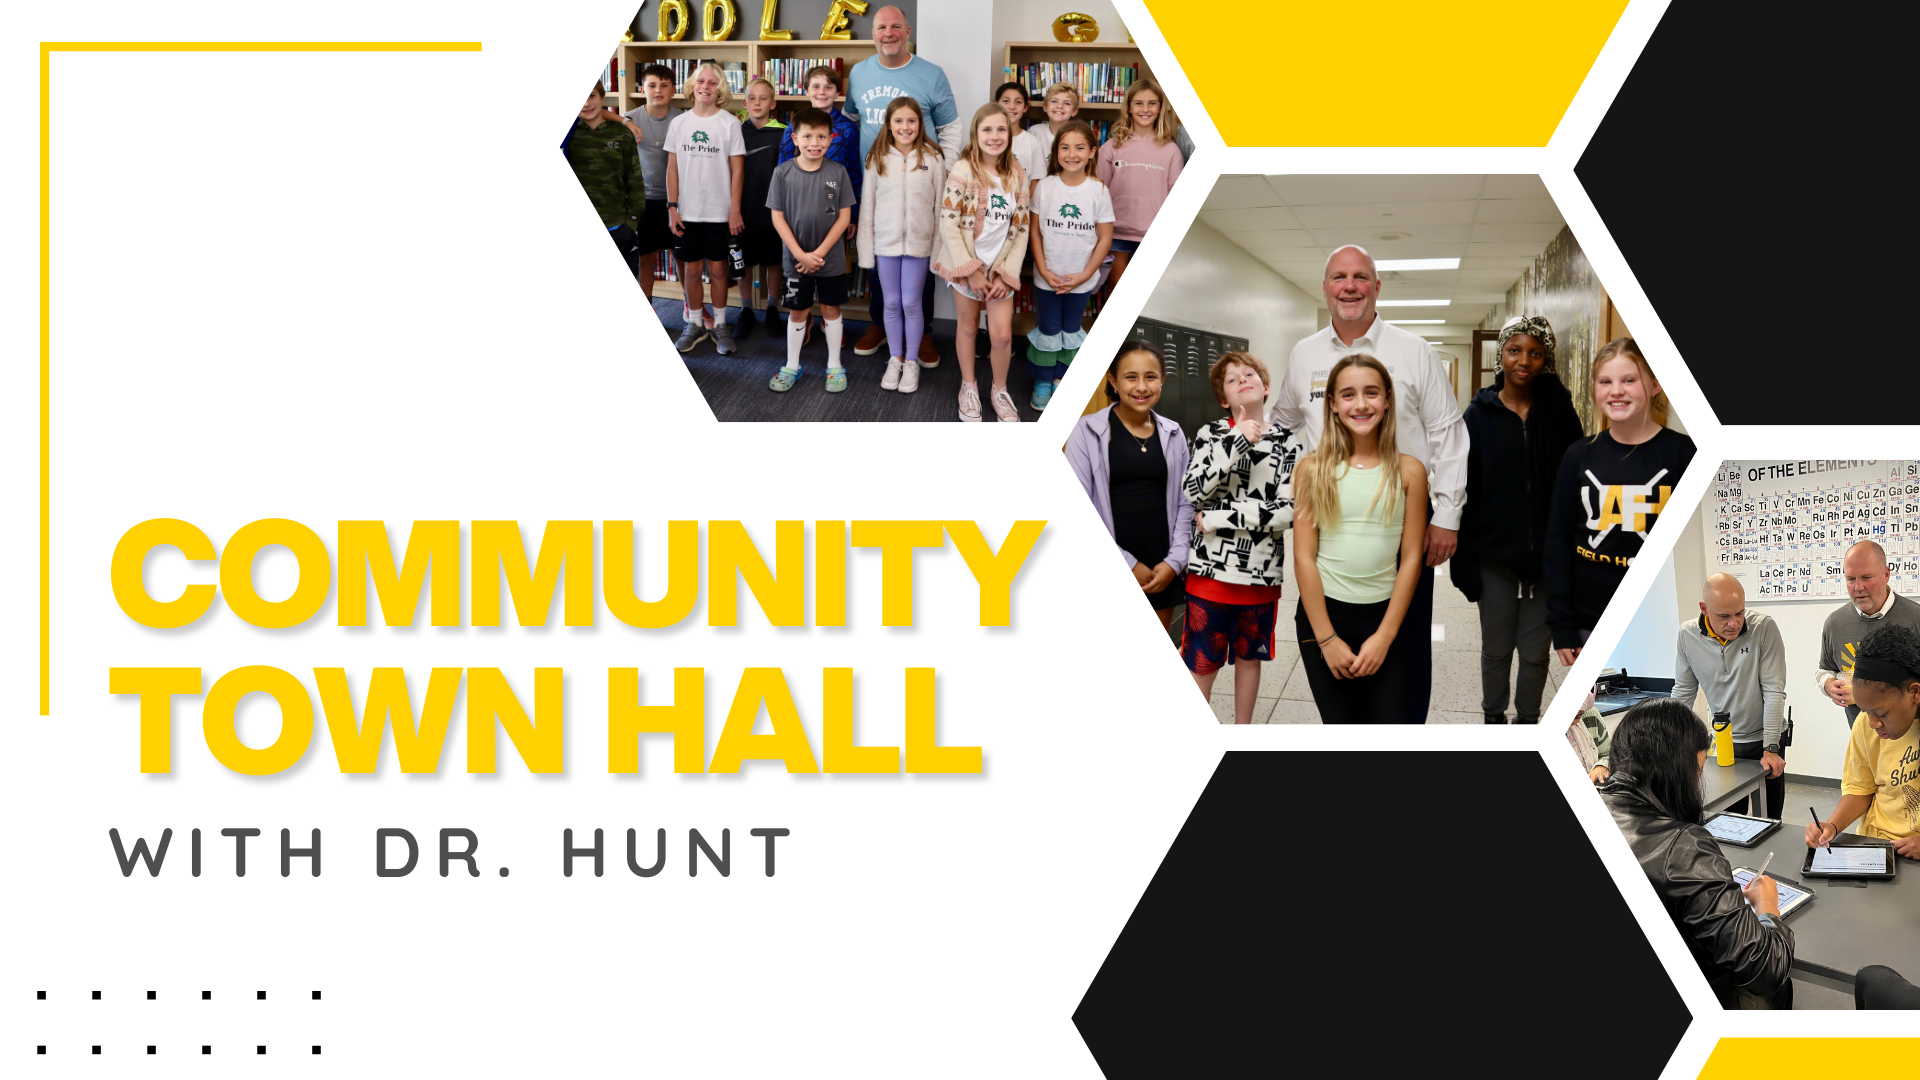 Community Town Hall with Dr. Hunt graphic with gold and black hexagons and hexagons including photos of kids